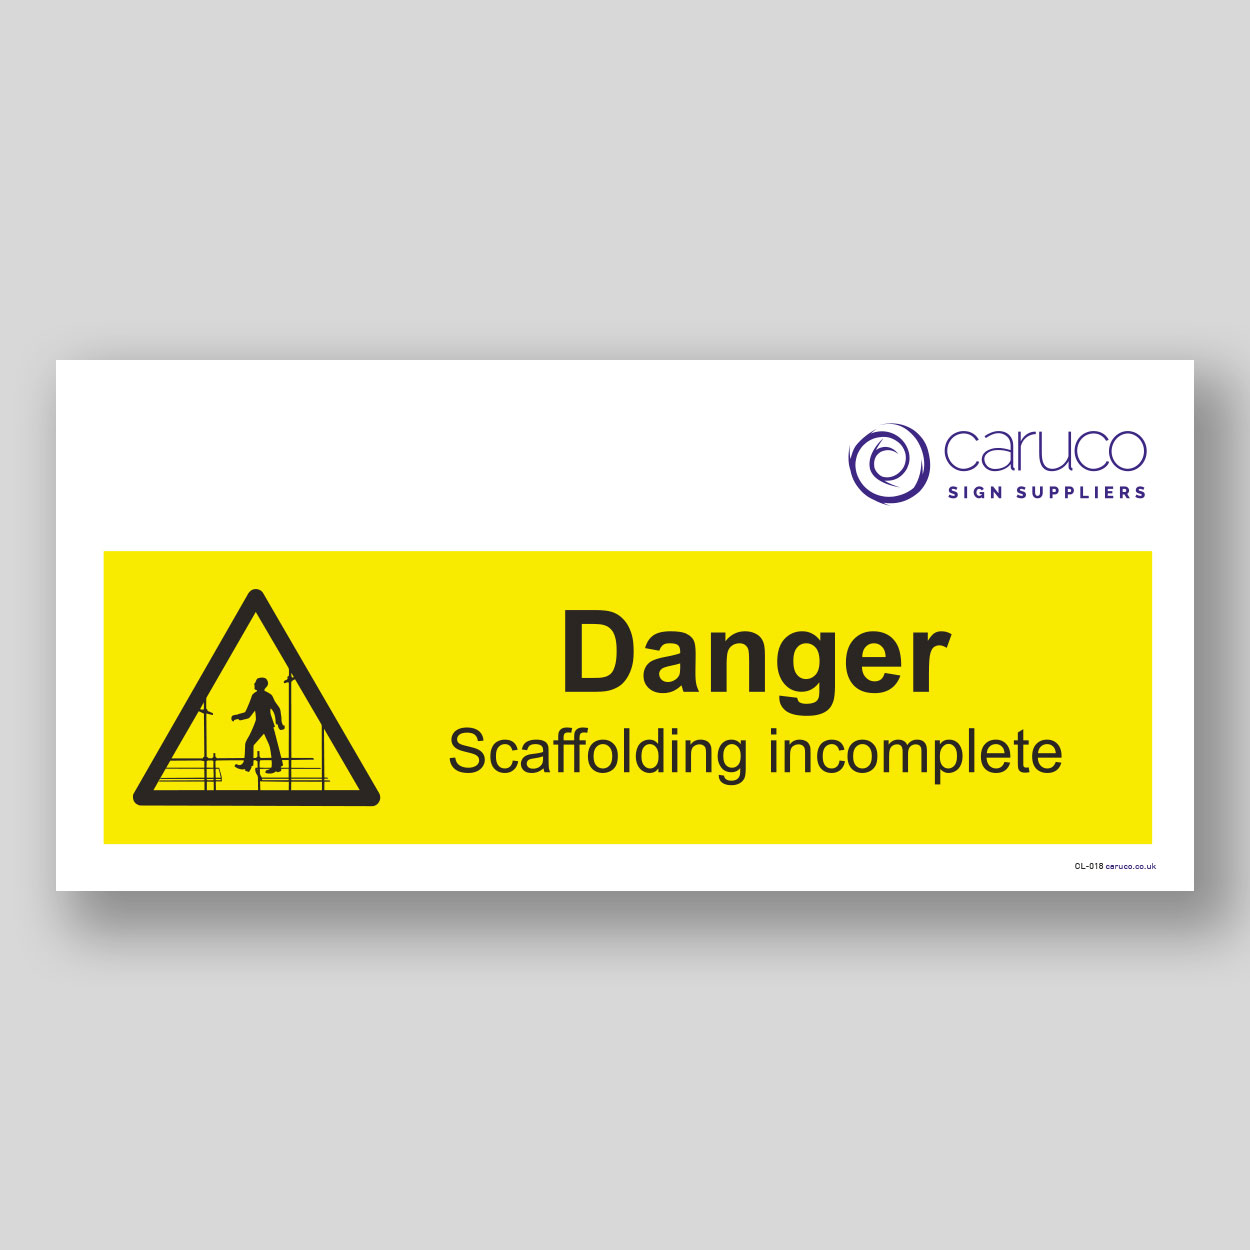 CL-018 Danger - scaffold incomplete